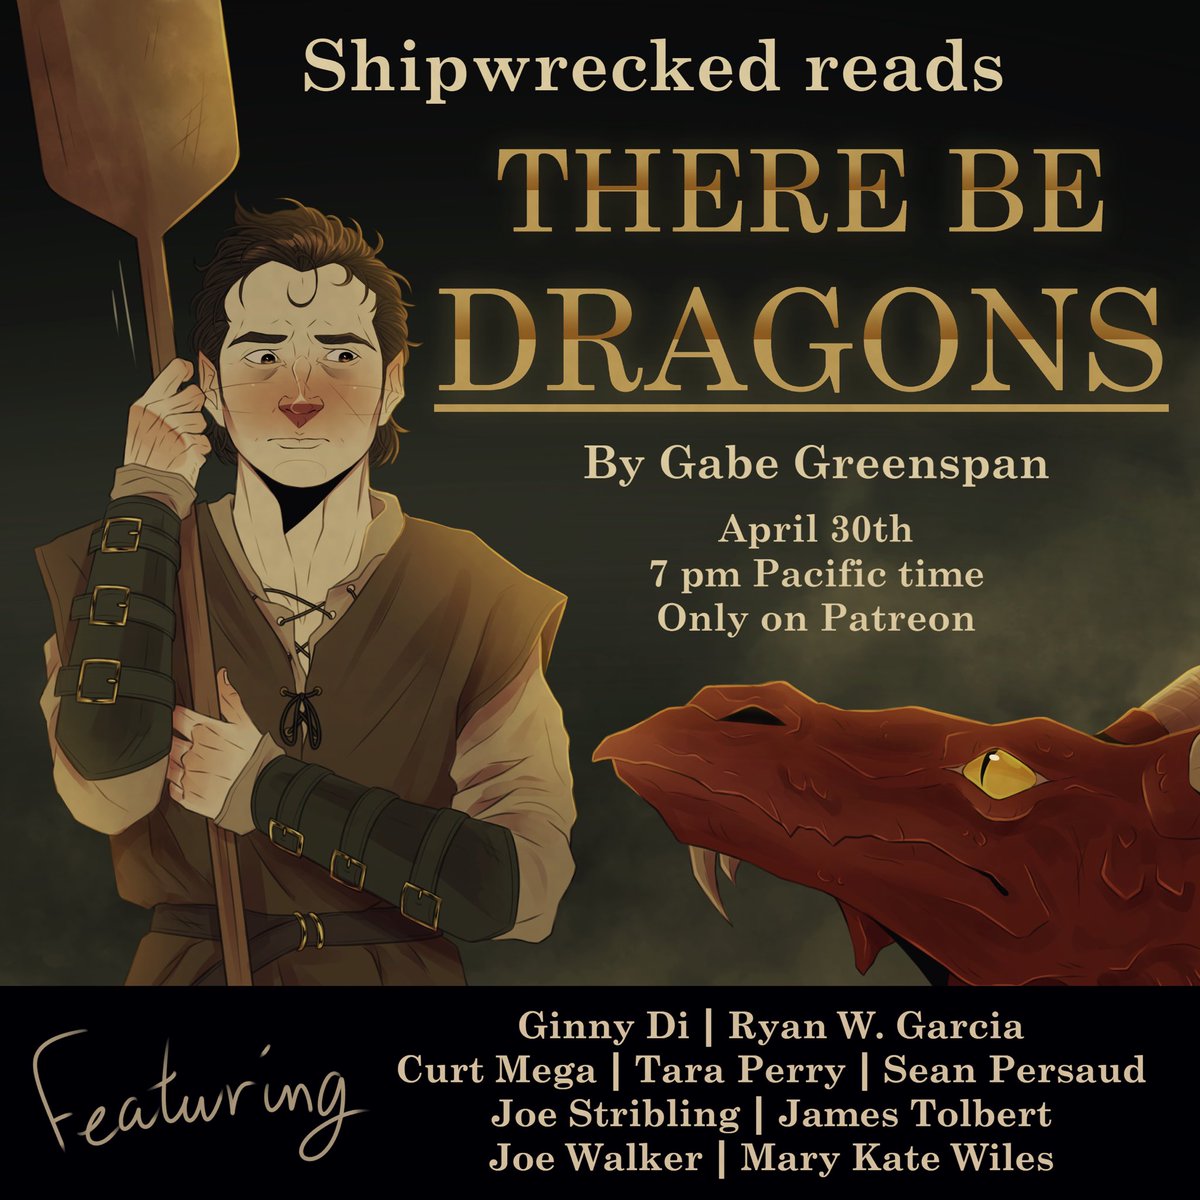 This month’s P@treon reading is an original D&D inspired pilot script by our friend Gabe Greenspan! Patrons at the Silent Era Sirens level can join us on April 30th at 7 pm to experience this original tale. Hope you can join us! 🎨: Viivi Pyykkö Patreon.com/shipwreckedcom…